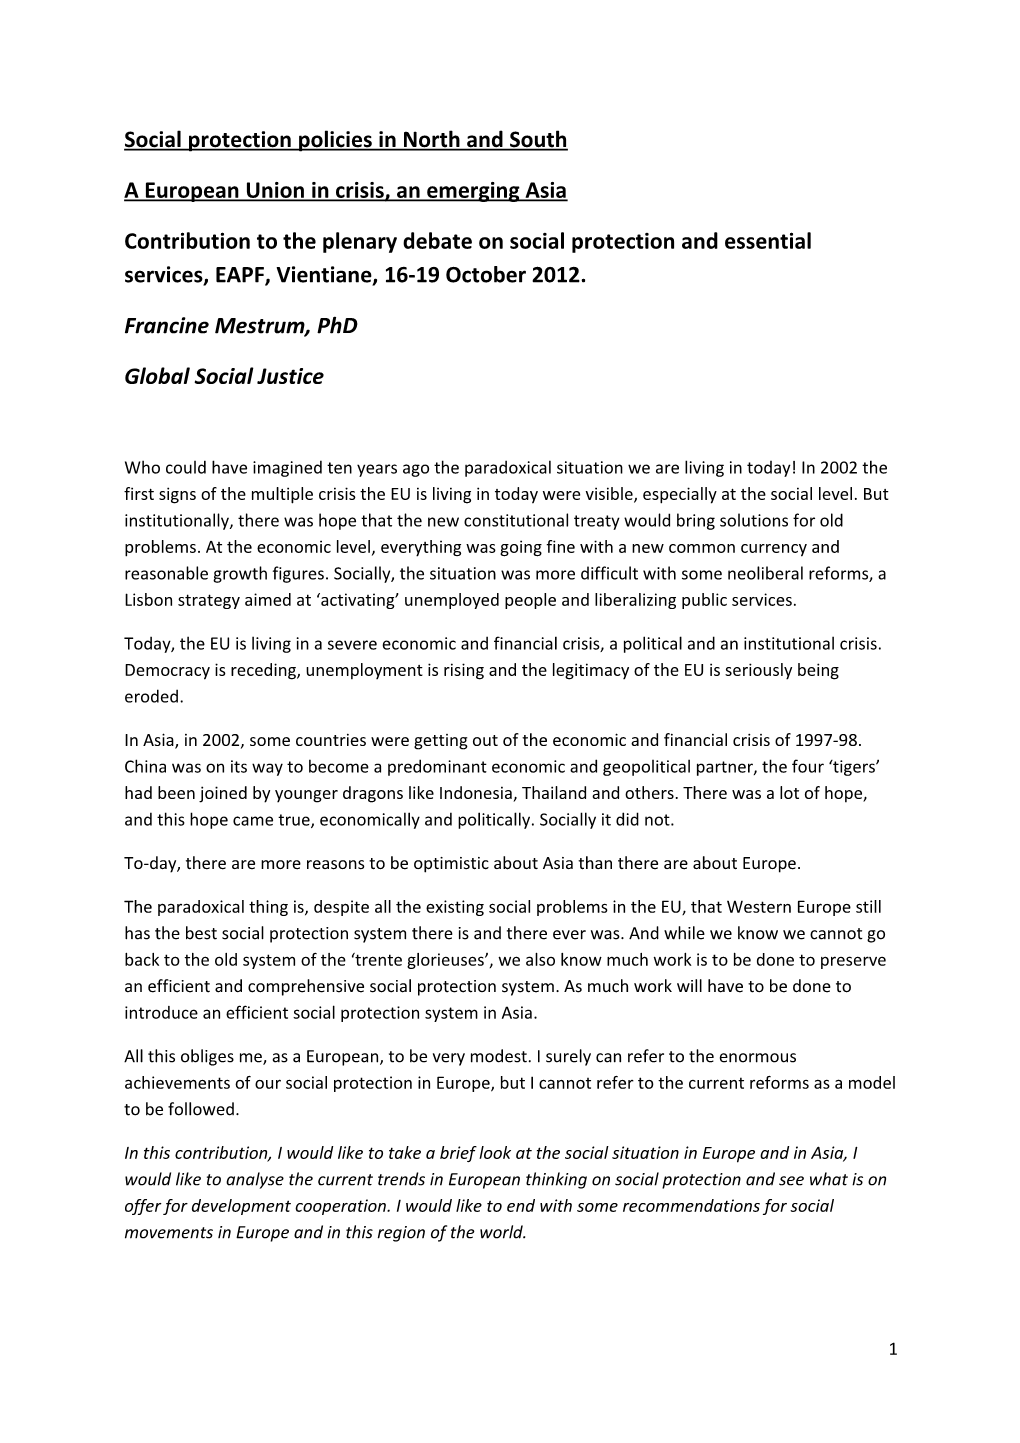 Social Protection Policies in North and South